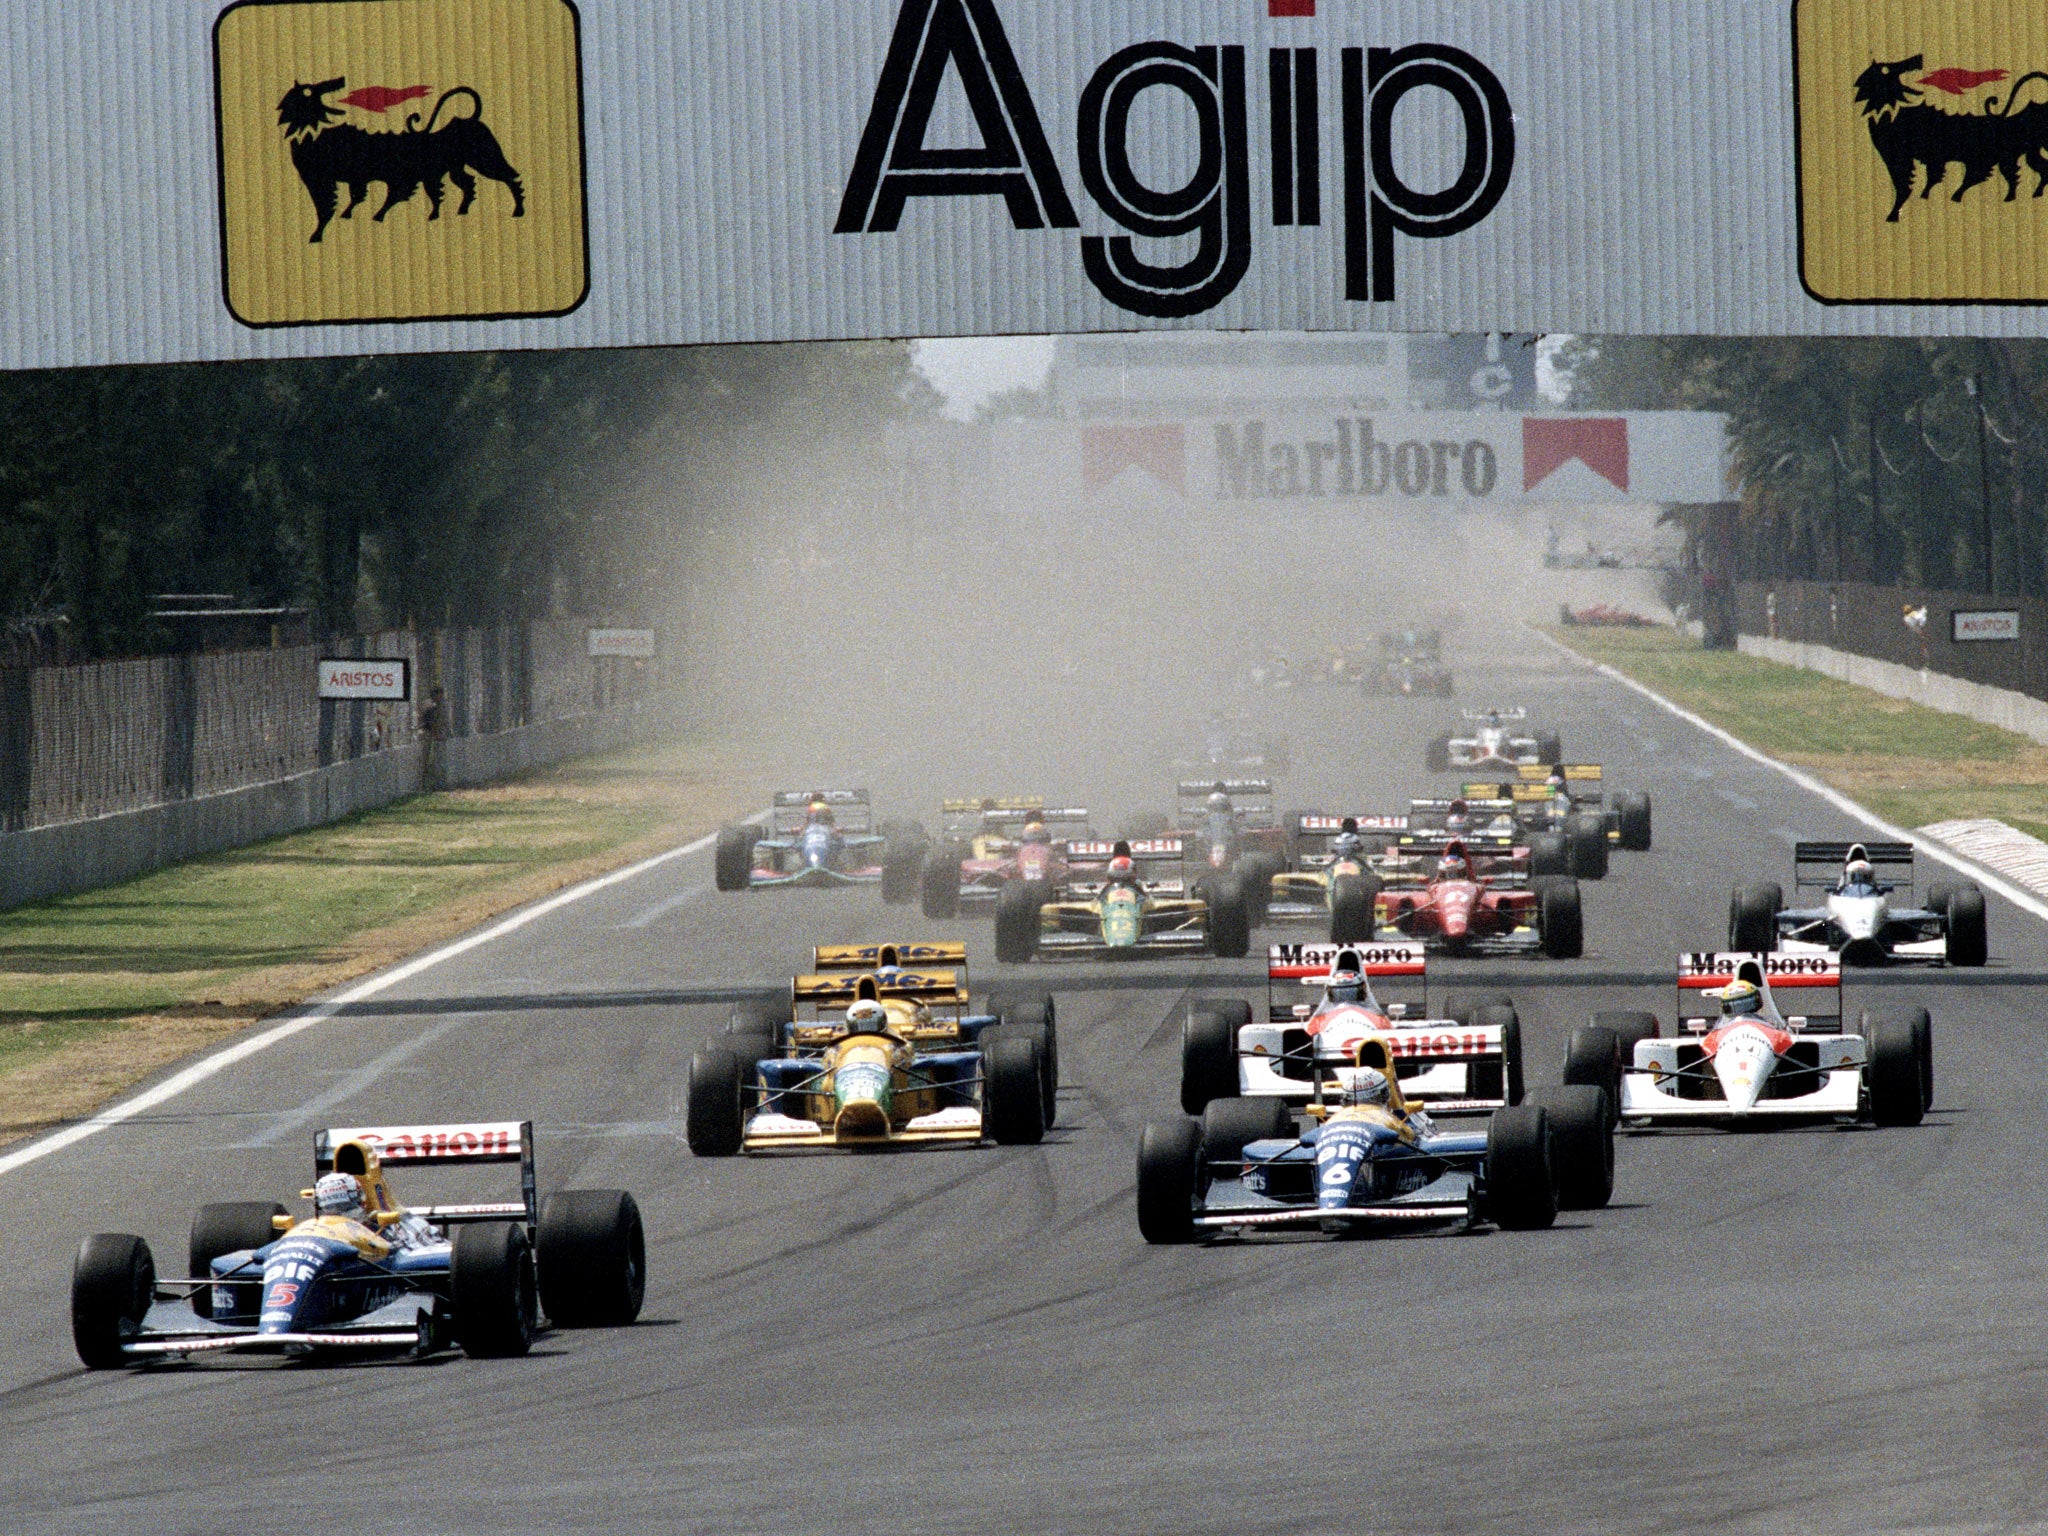 A view of the Mexico Grand Prix, when it was last held there in 1992